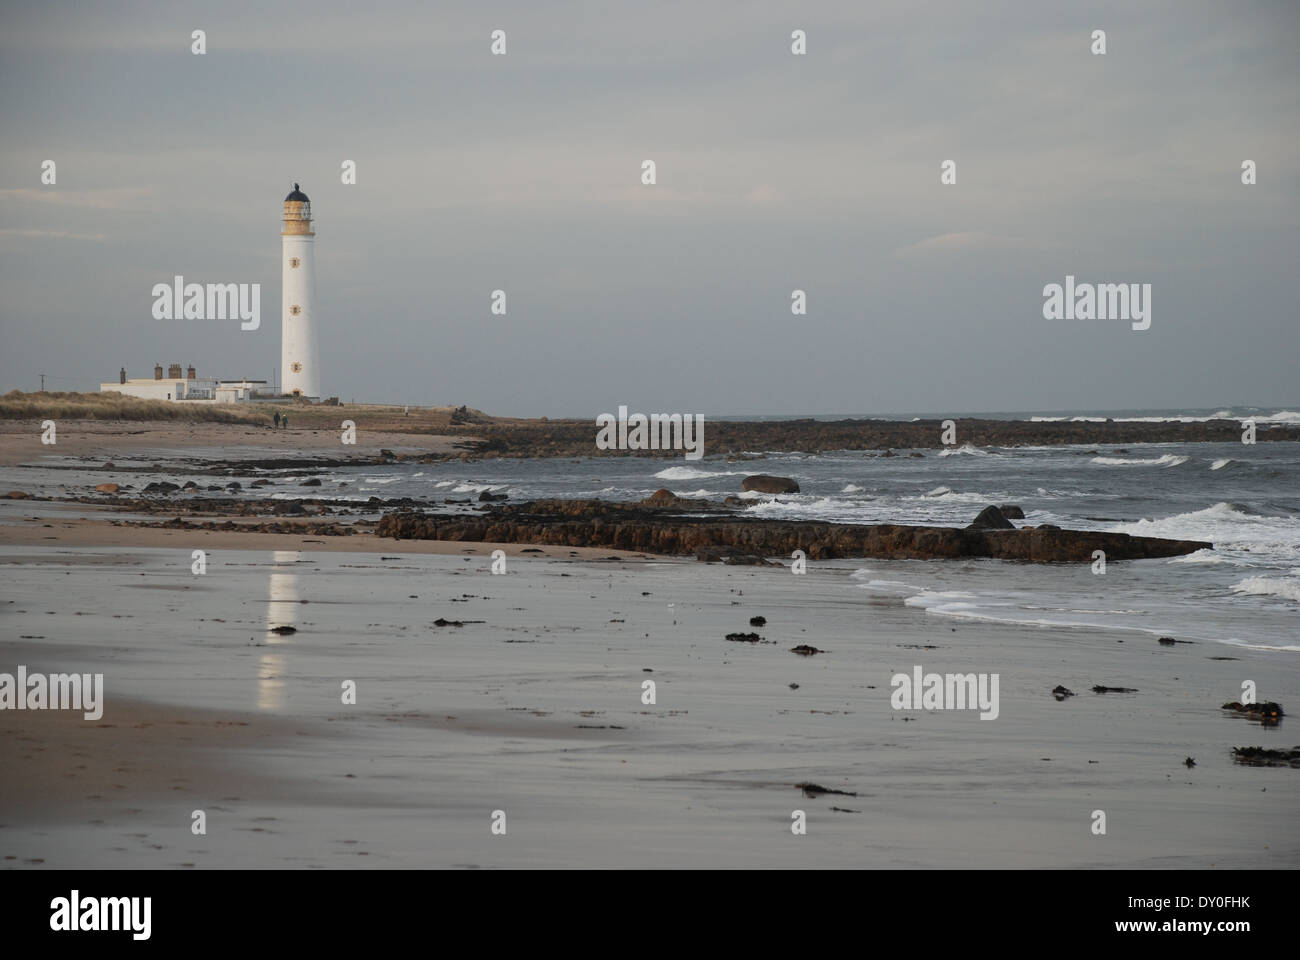 Barns Ness Lighthouse near Dunbar on the River Forth estuary. It stands along the beach from Torness Nuclear power station. Stock Photo